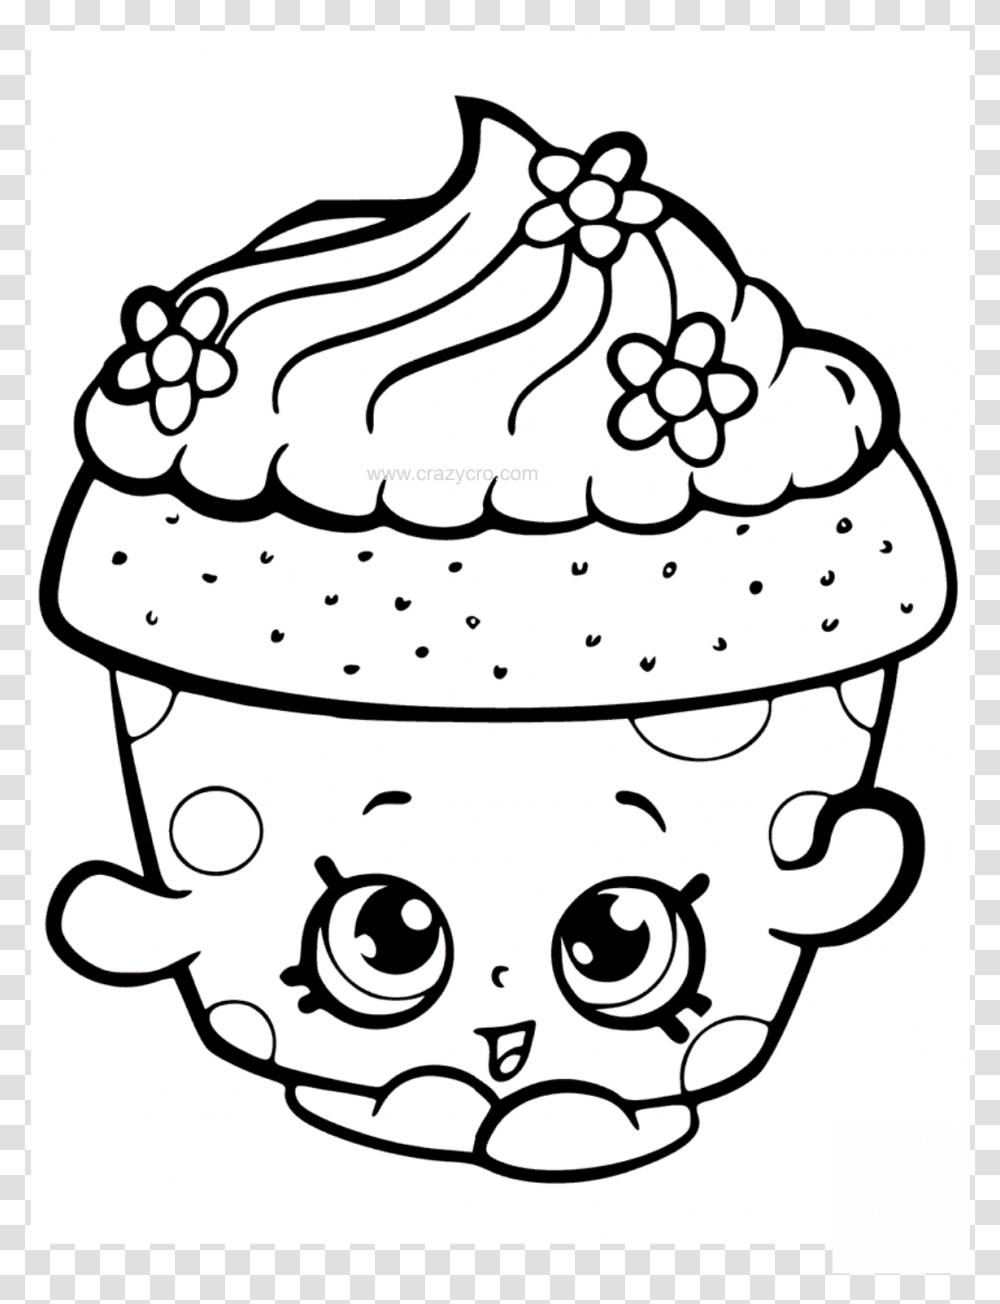 Shopkin Drawing Black And White Clipart Cute Cupcake Coloring Pages, Cream, Dessert, Food, Birthday Cake Transparent Png